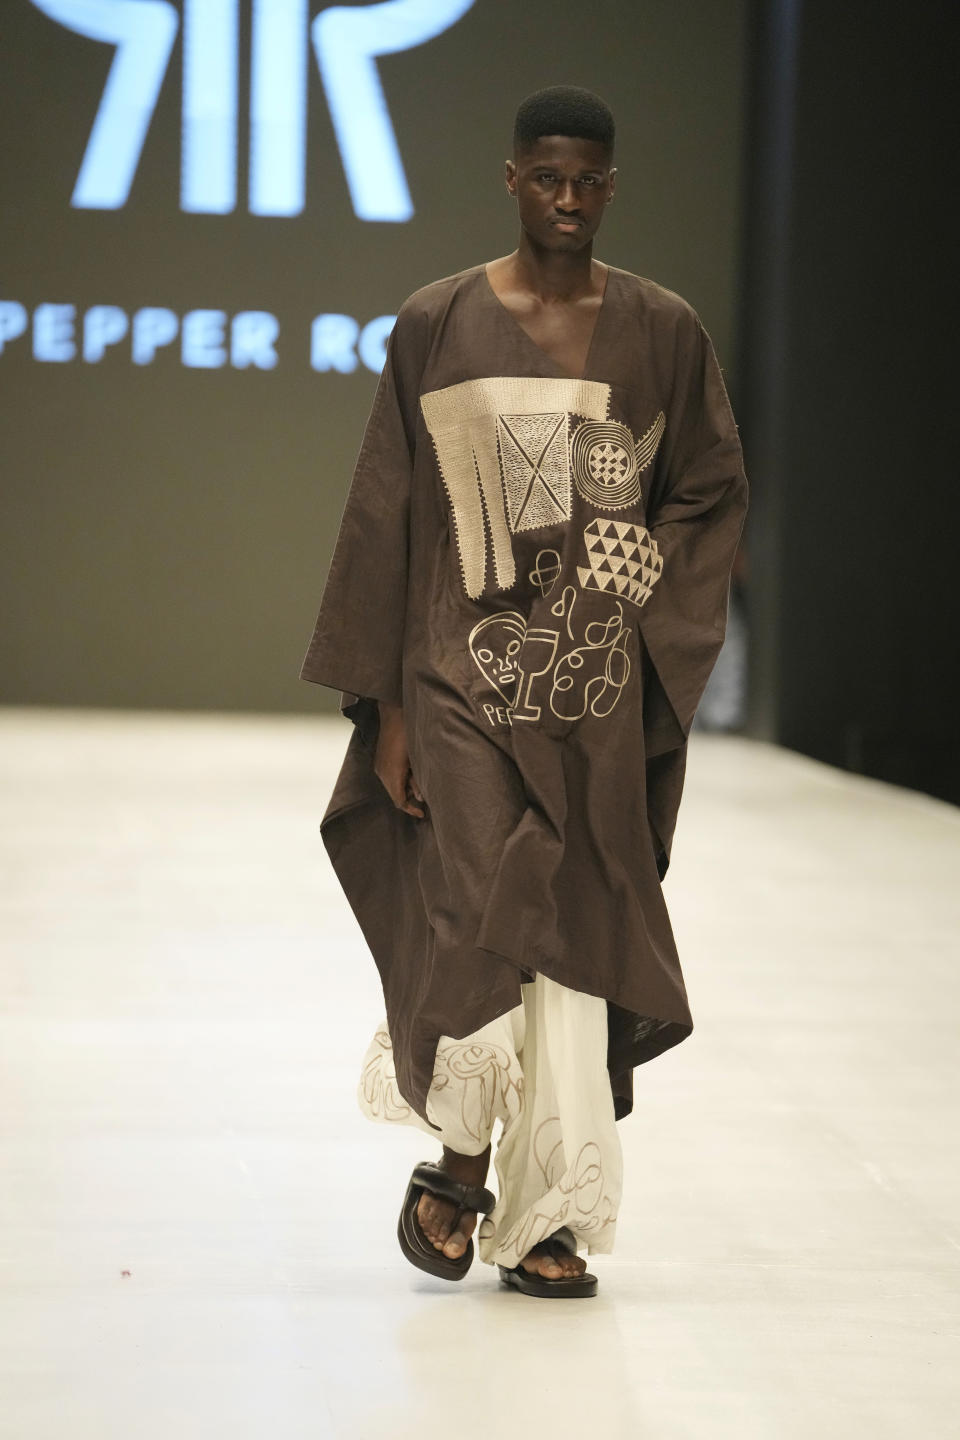 A model wears a creation by Pepper Row during the Lagos Fashion Week in Lagos, Nigeria, Thursday, Oct. 26, 2023. Africa's fashion industry is rapidly growing to meet local and international demands but a lack of adequate investment still limits its full potential, UNESCO said Thursday in its new report released at this year's Lagos Fashion Week show. (AP Photo/Sunday Alamba)